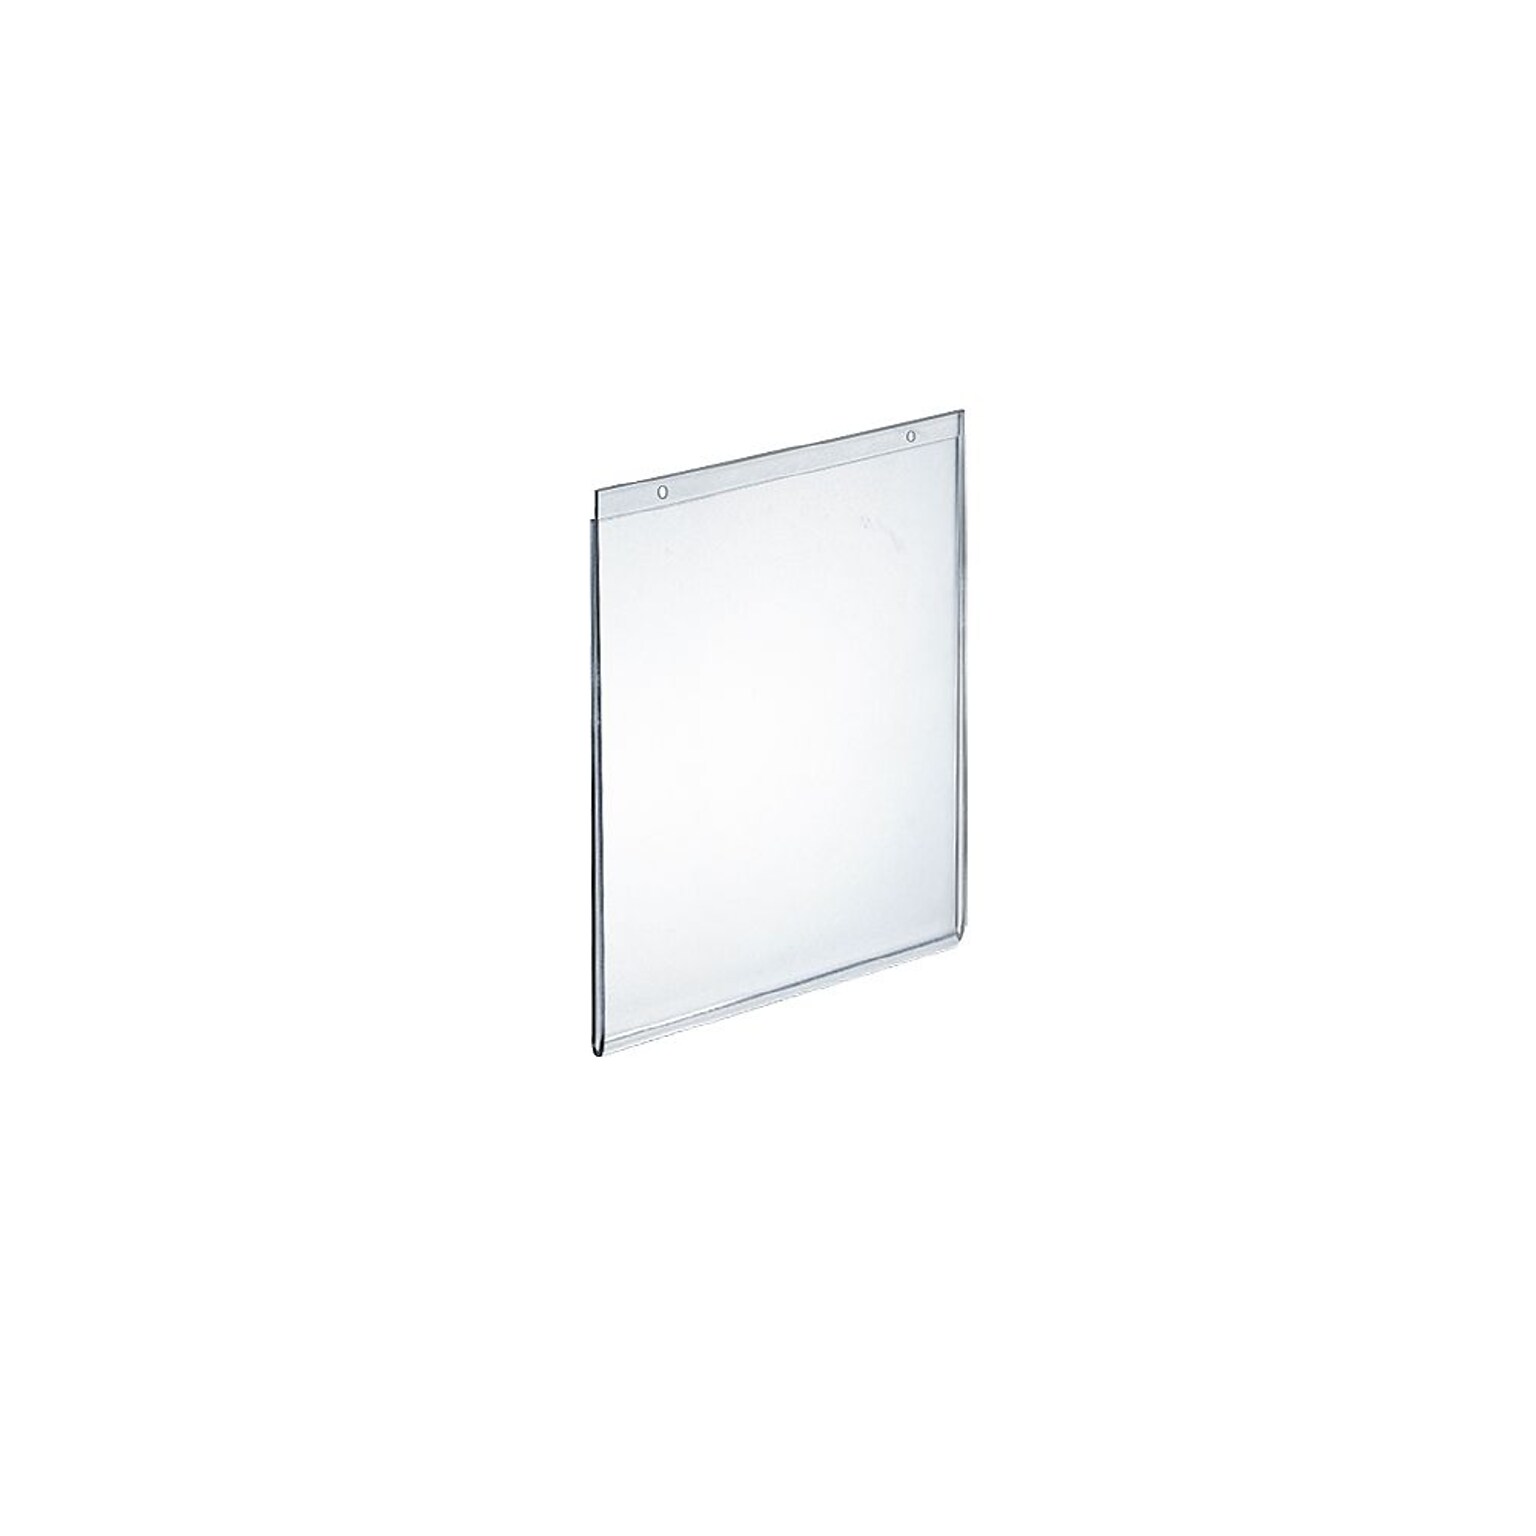 Azar® 7 x 5 1/2 Vertical Wall Mount Acrylic Sign Holder, Clear, 10/Pack